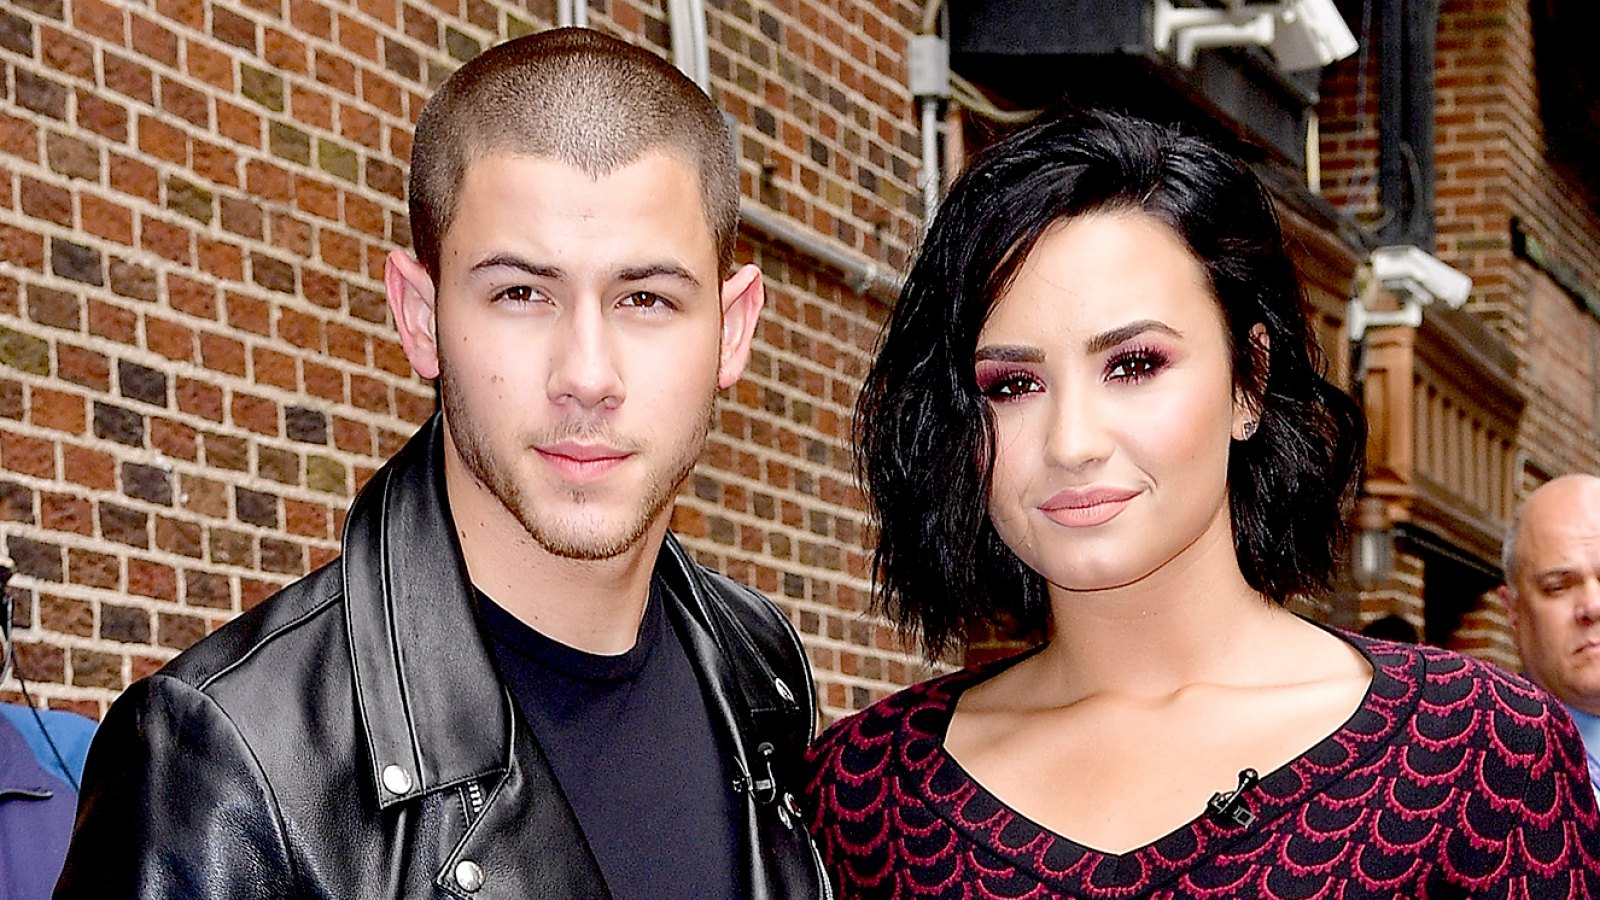 Nick Jonas and Demi Lovato visit 'The Late Show With Stephen Colbert' at the Ed Sullivan Theater on June 16, 2016, in New York City.